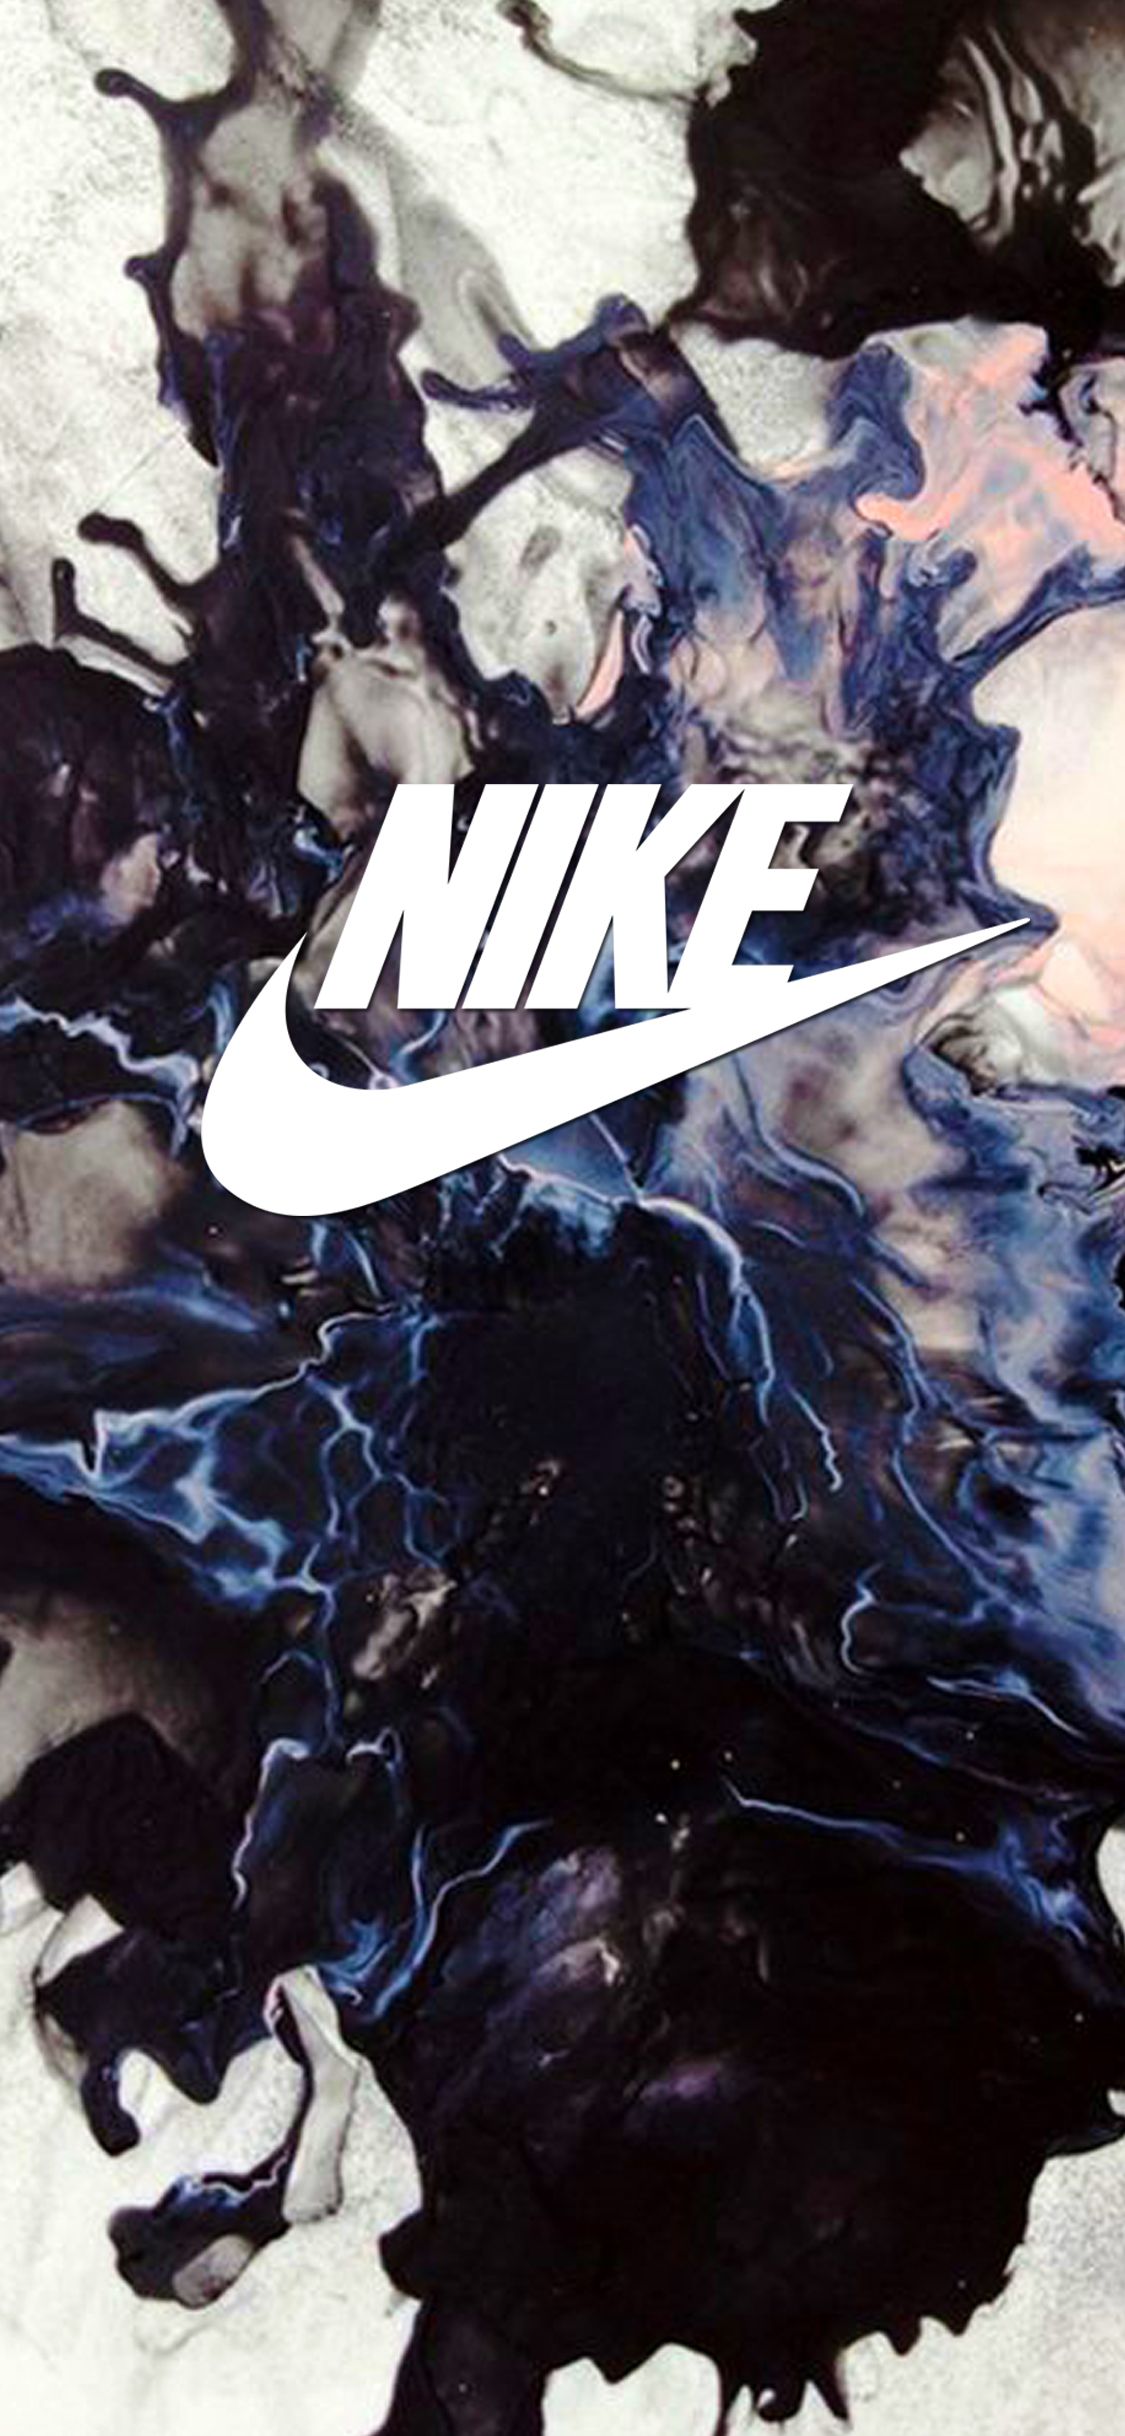 Nike Iphone Xr Wallpapers